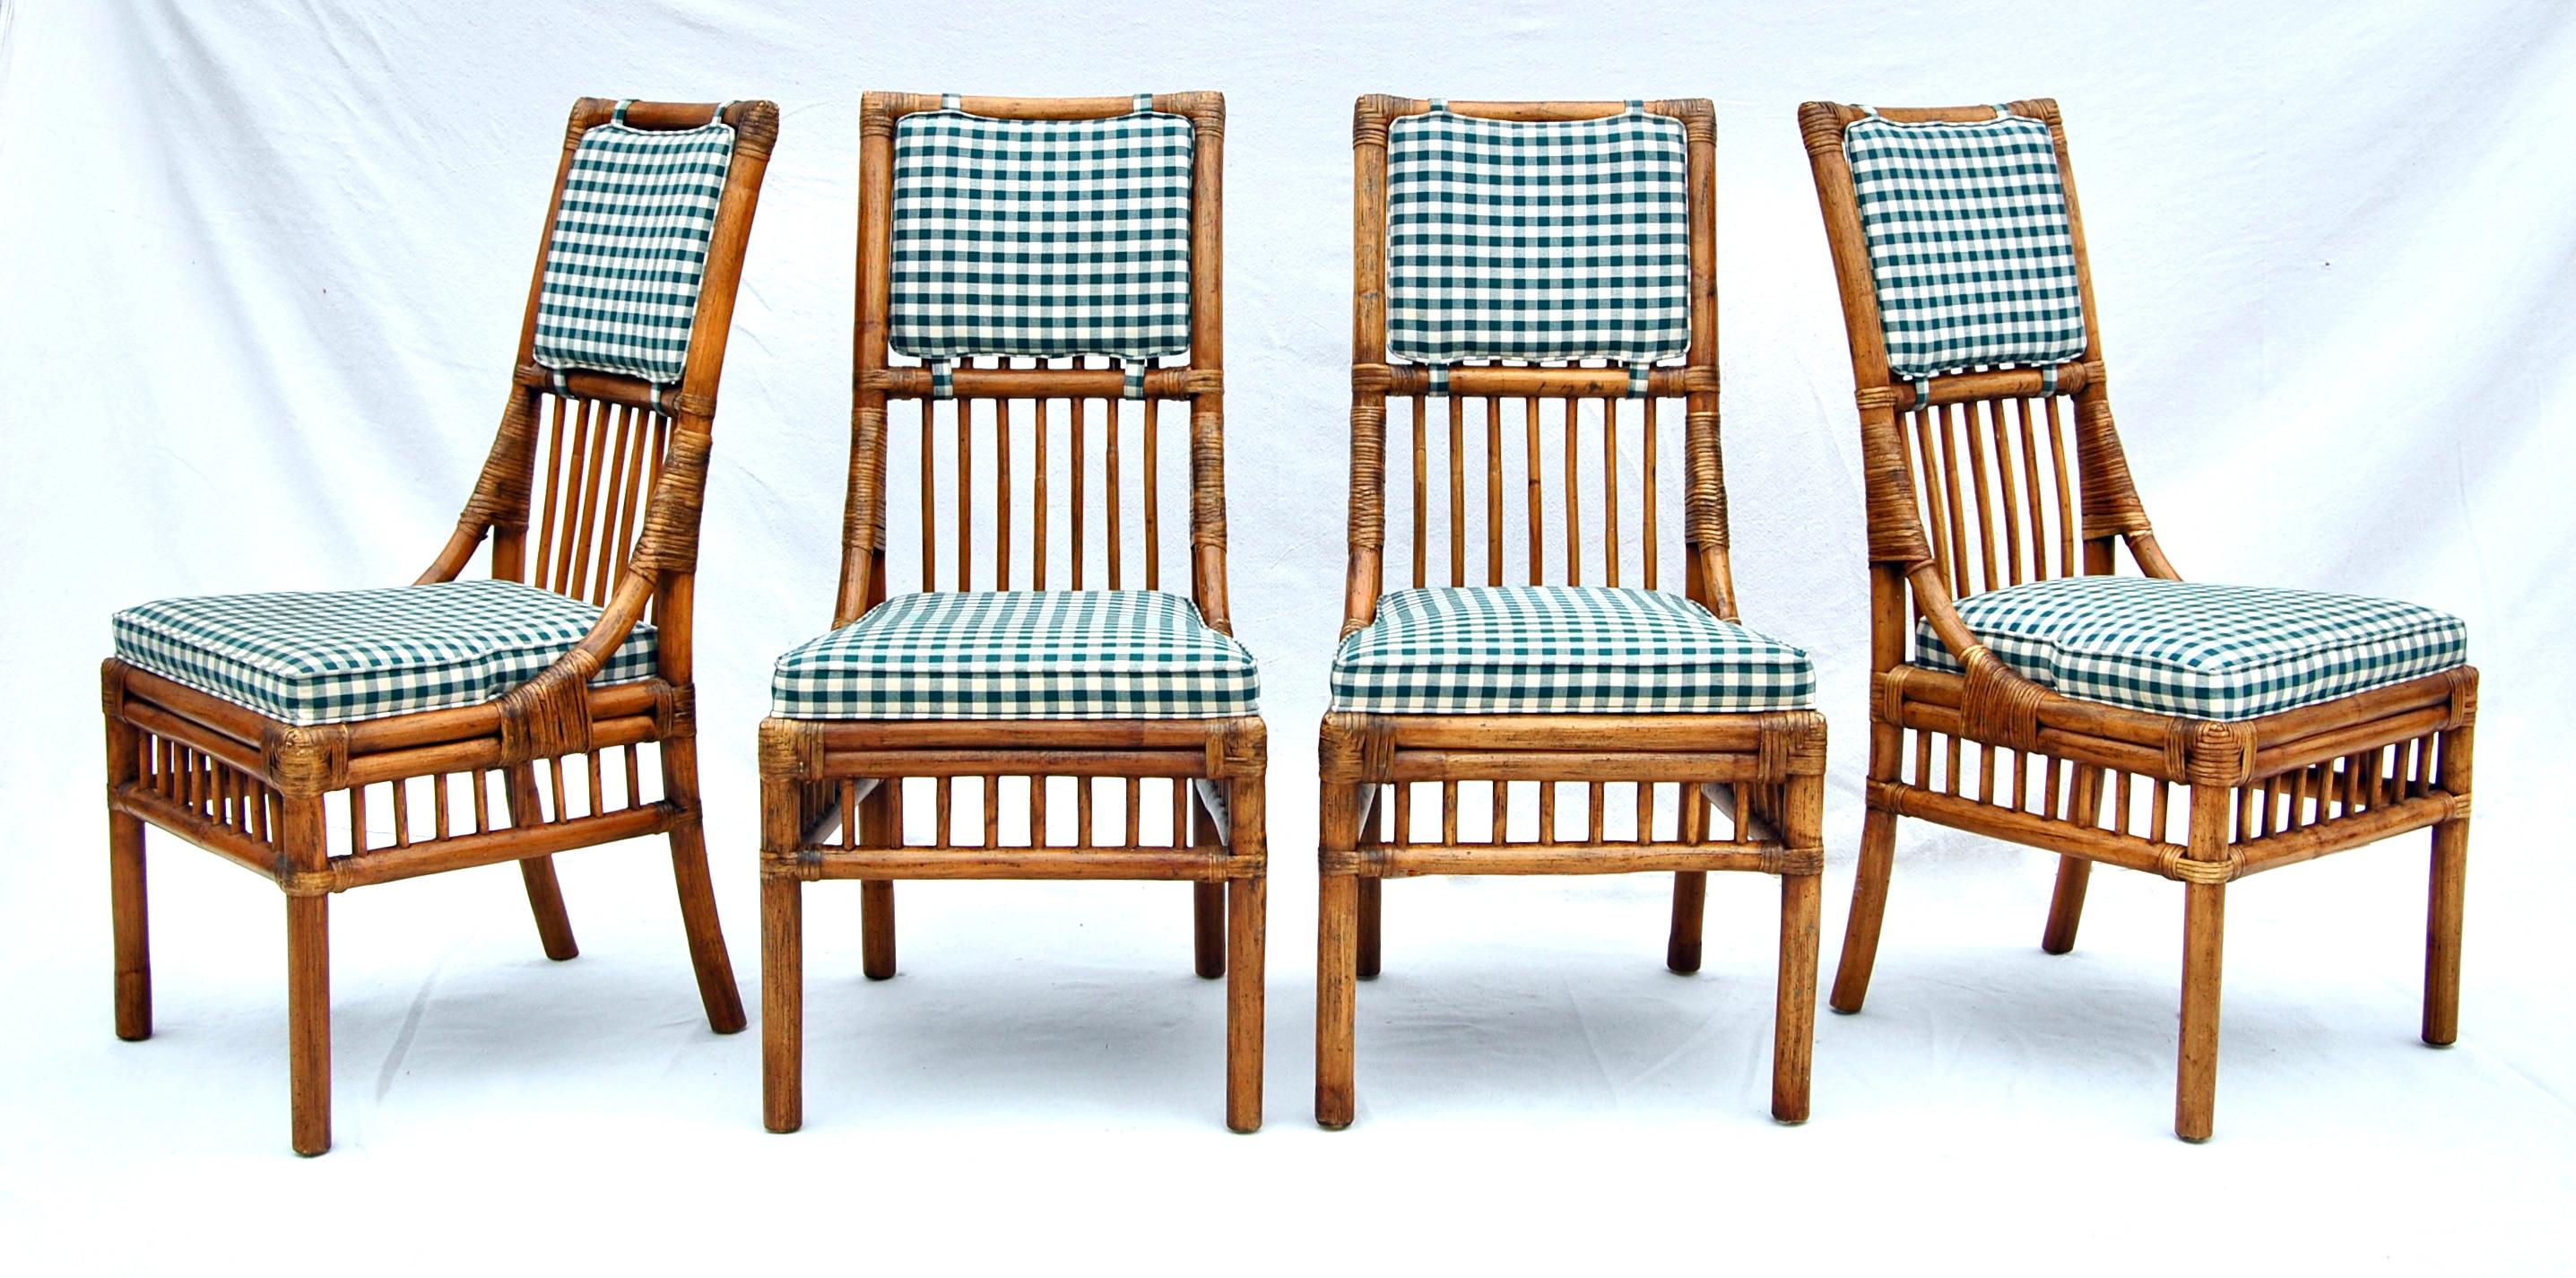 Scarcely seen set of Henredon French bistro style solid wood & rattan dining chairs in Forest green / white check & Mohair Upholstery. Two captain and four arm chairs complete the set of six. Among many features we love the elongated Gazelle styling